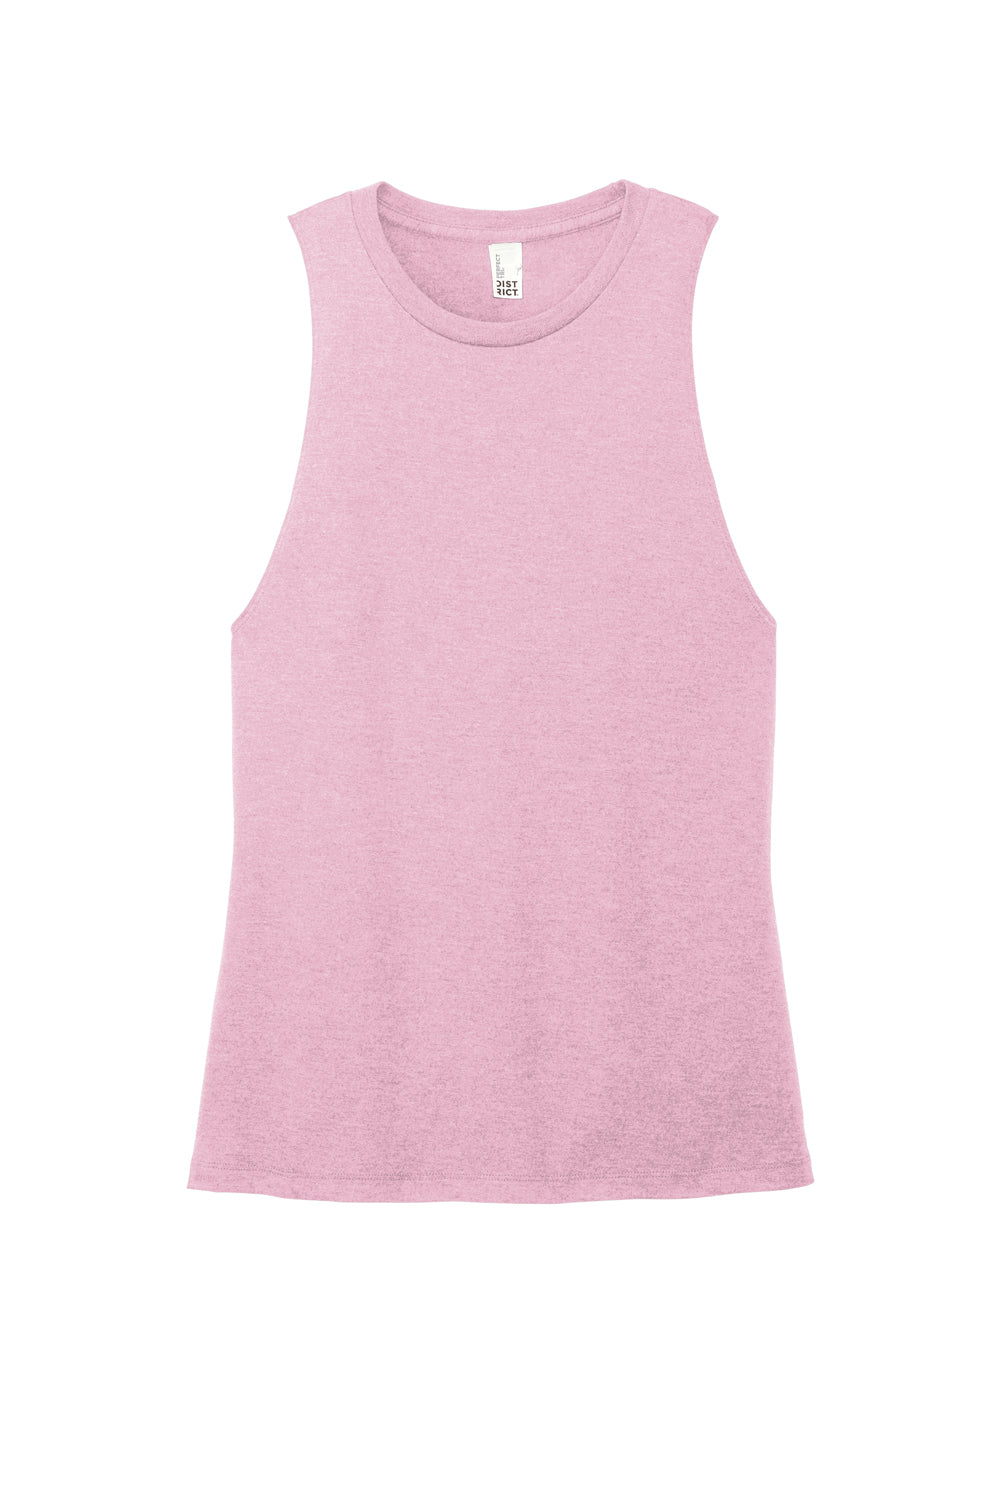 District DT153 Womens Perfect Tri Muscle Tank Top Heather Wisteria Pink Flat Front